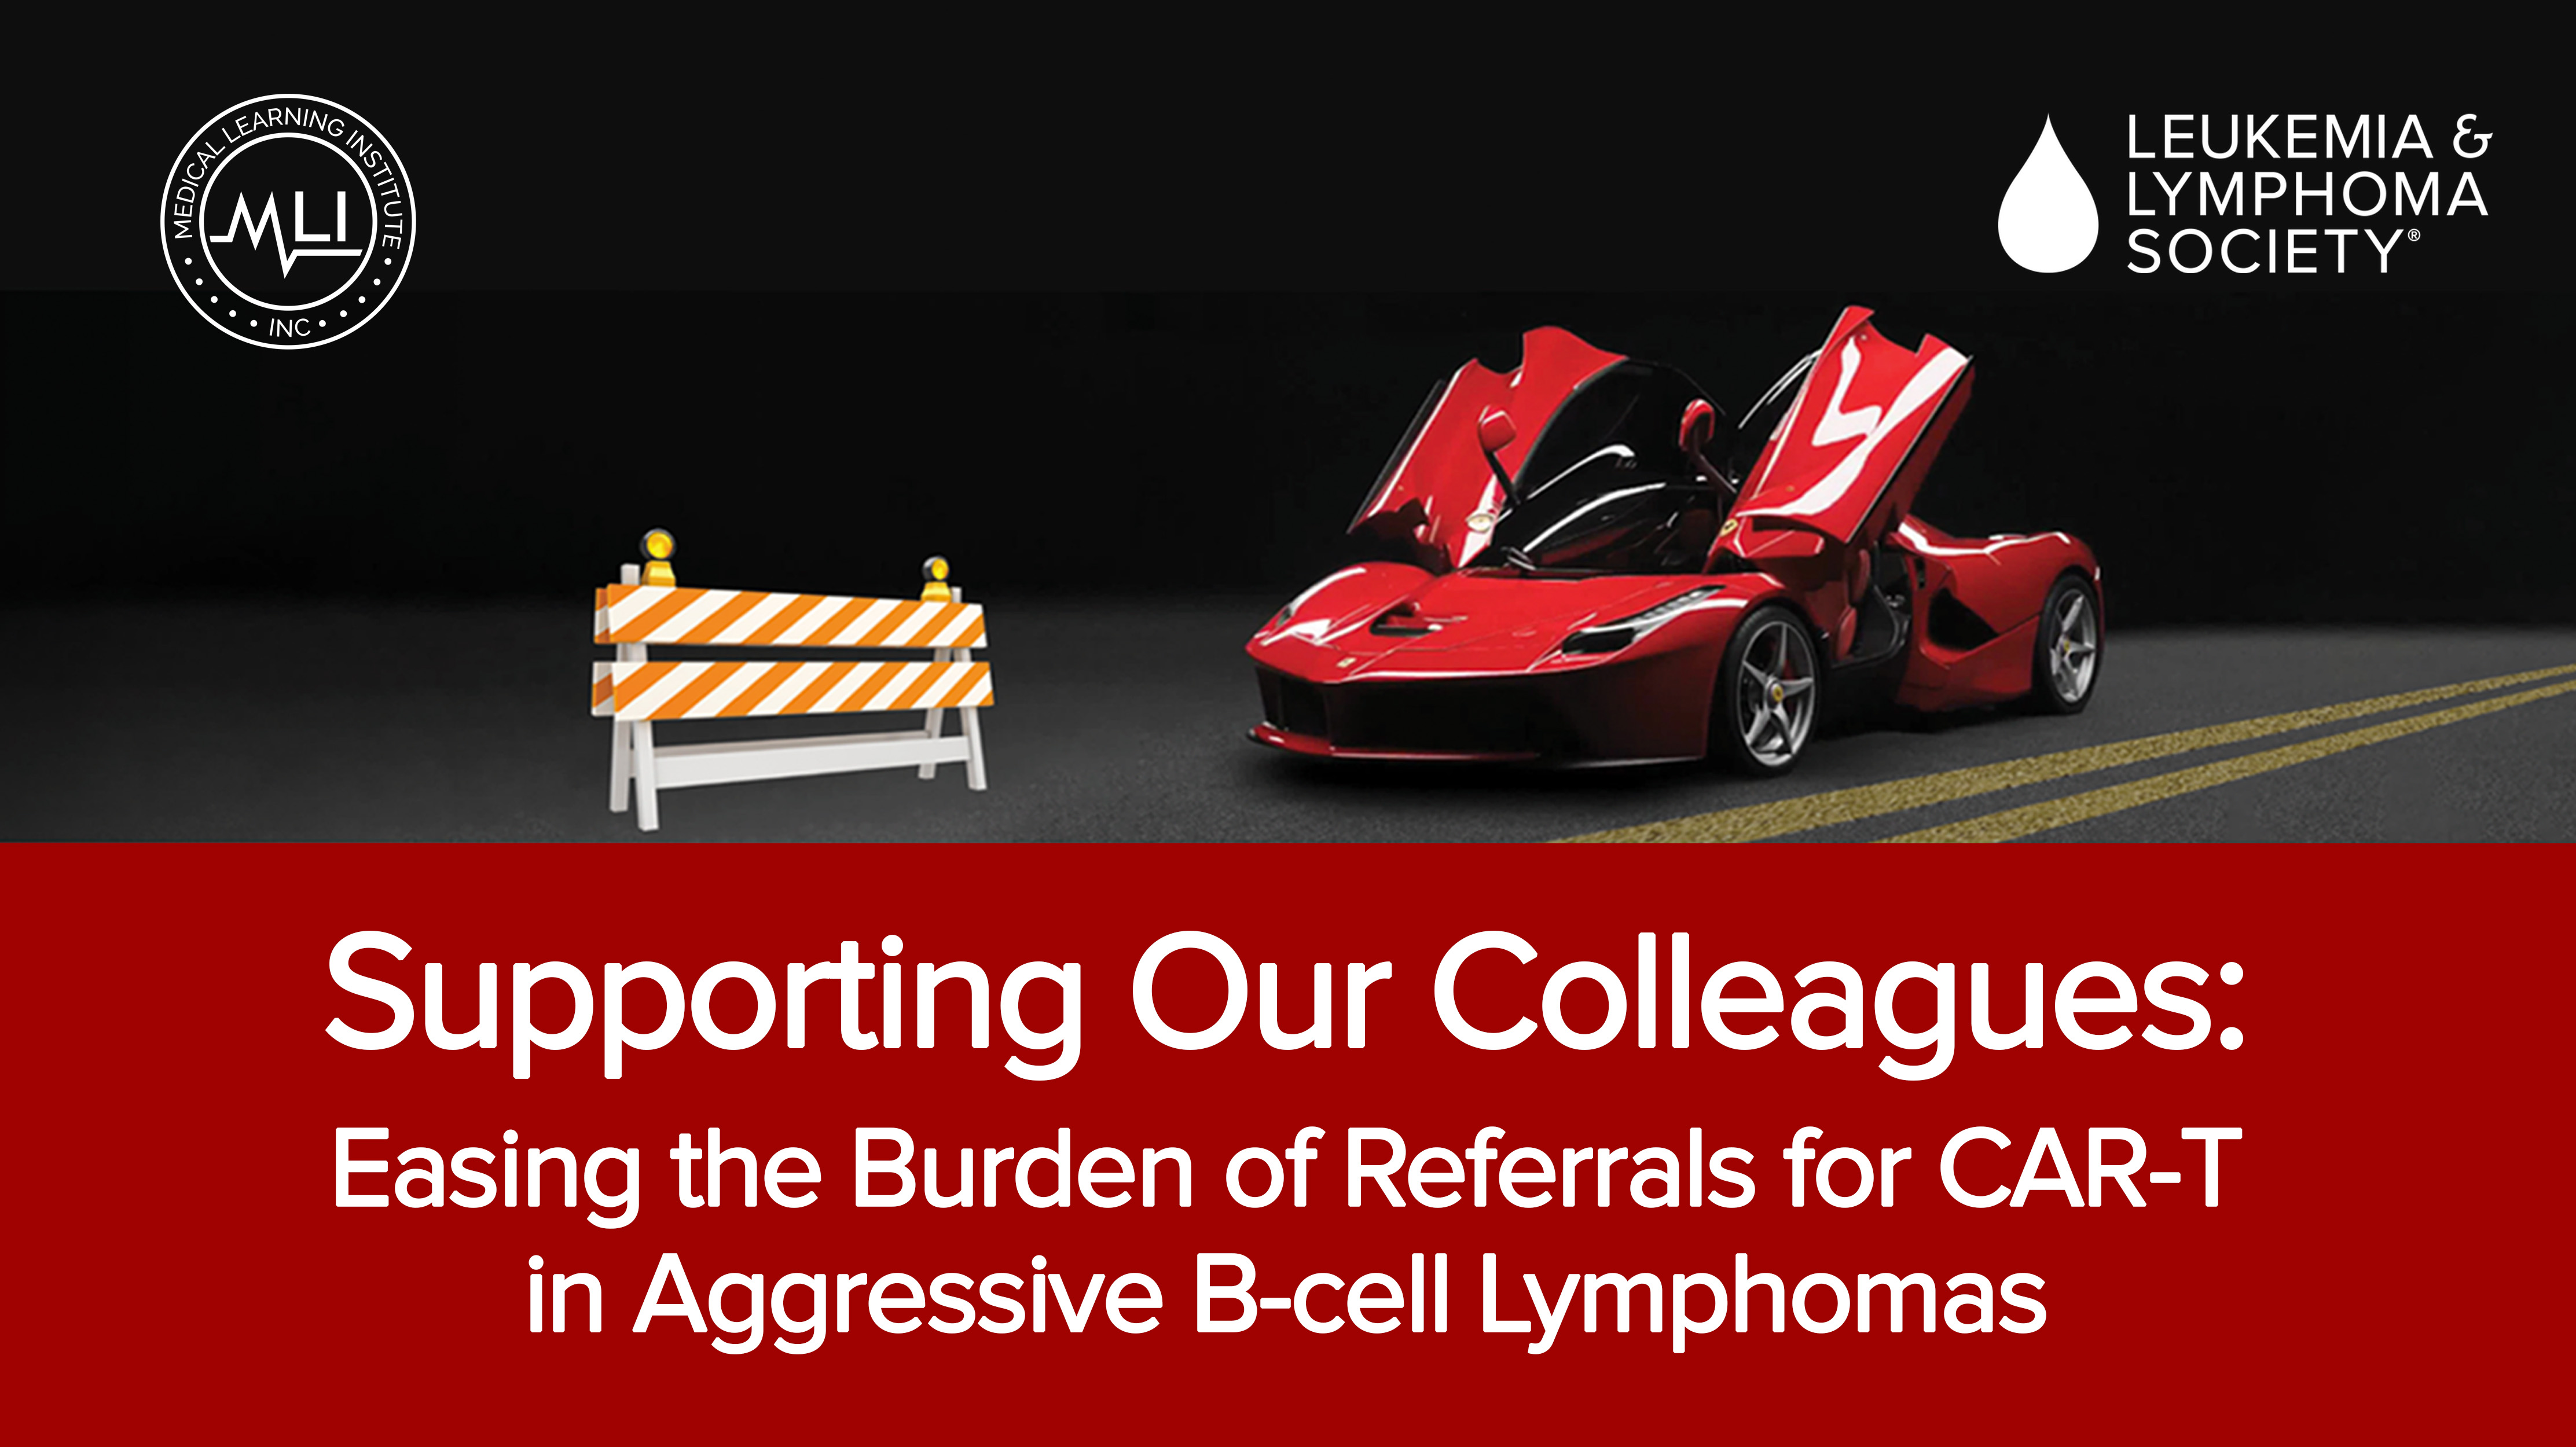 Supporting Our Colleagues: Easing the Burden of Referrals for CAR-T in Aggressive B-cell Lymphomas